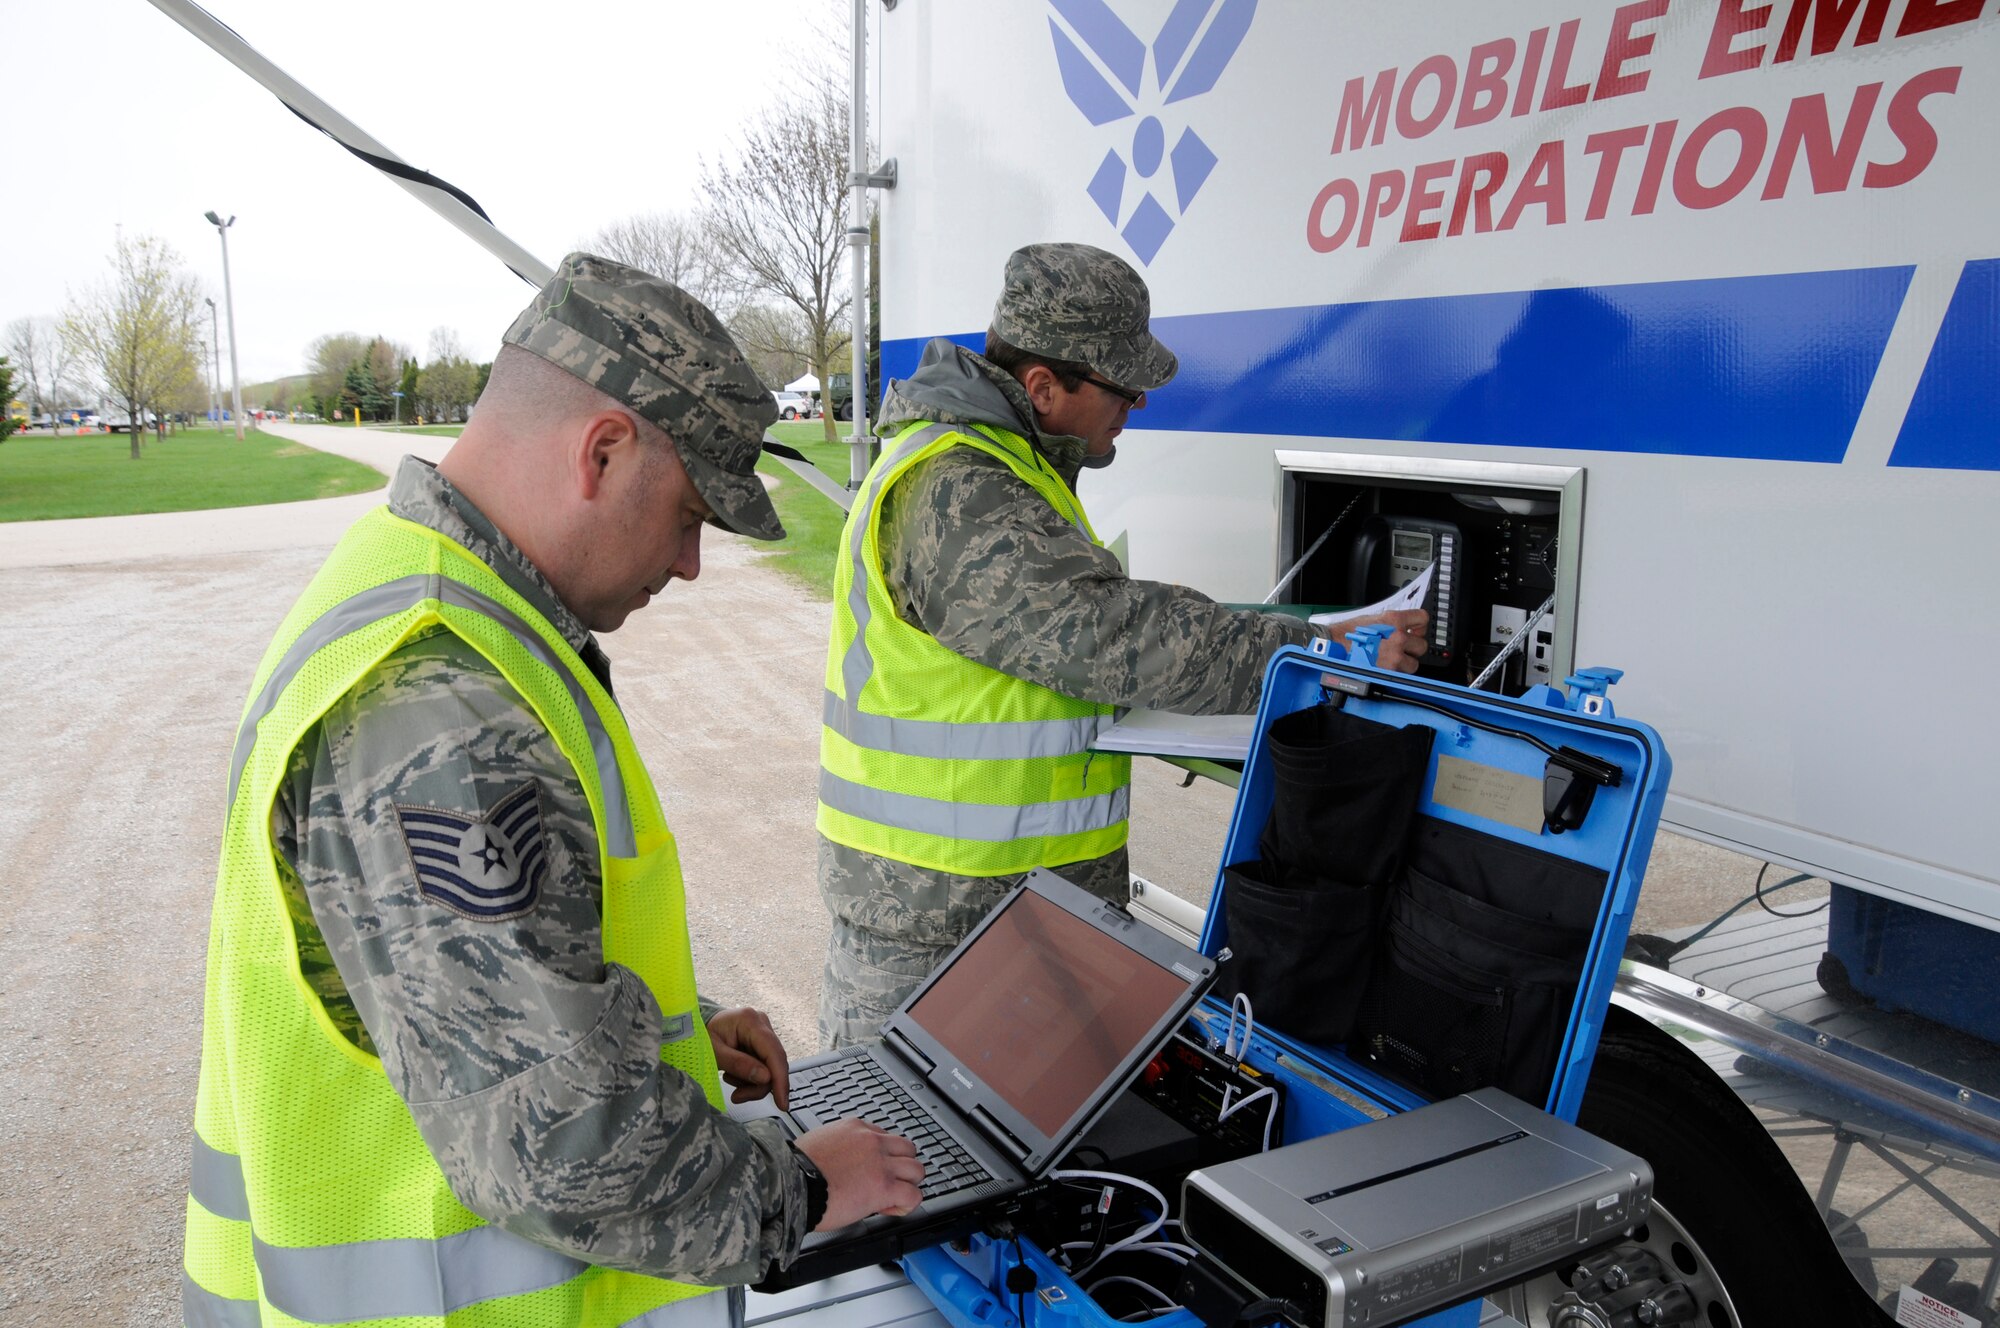 Tech. Sgt. Jamie Heinzelman (left) and Master Sgt. John Parrish, communications personnel from the 127th Wing, Michigan Air National Guard, set up a tactical communications pack (TAC PAK) outside of their Mobile Emergency Operations Center (MEOC) during SIMCOM 2014 at Sunnyview Expo Center in Oshkosh, Wis. May 15, 2014. SIMCOM (State Interoperable Mobile Communications) is a functional exercise designed to test the interoperability of federal, state, county, tribal, volunteer, private organizations and defense communications and data sharing. Air National Guard photo by Tech. Sgt. Todd Pendleton (Released)